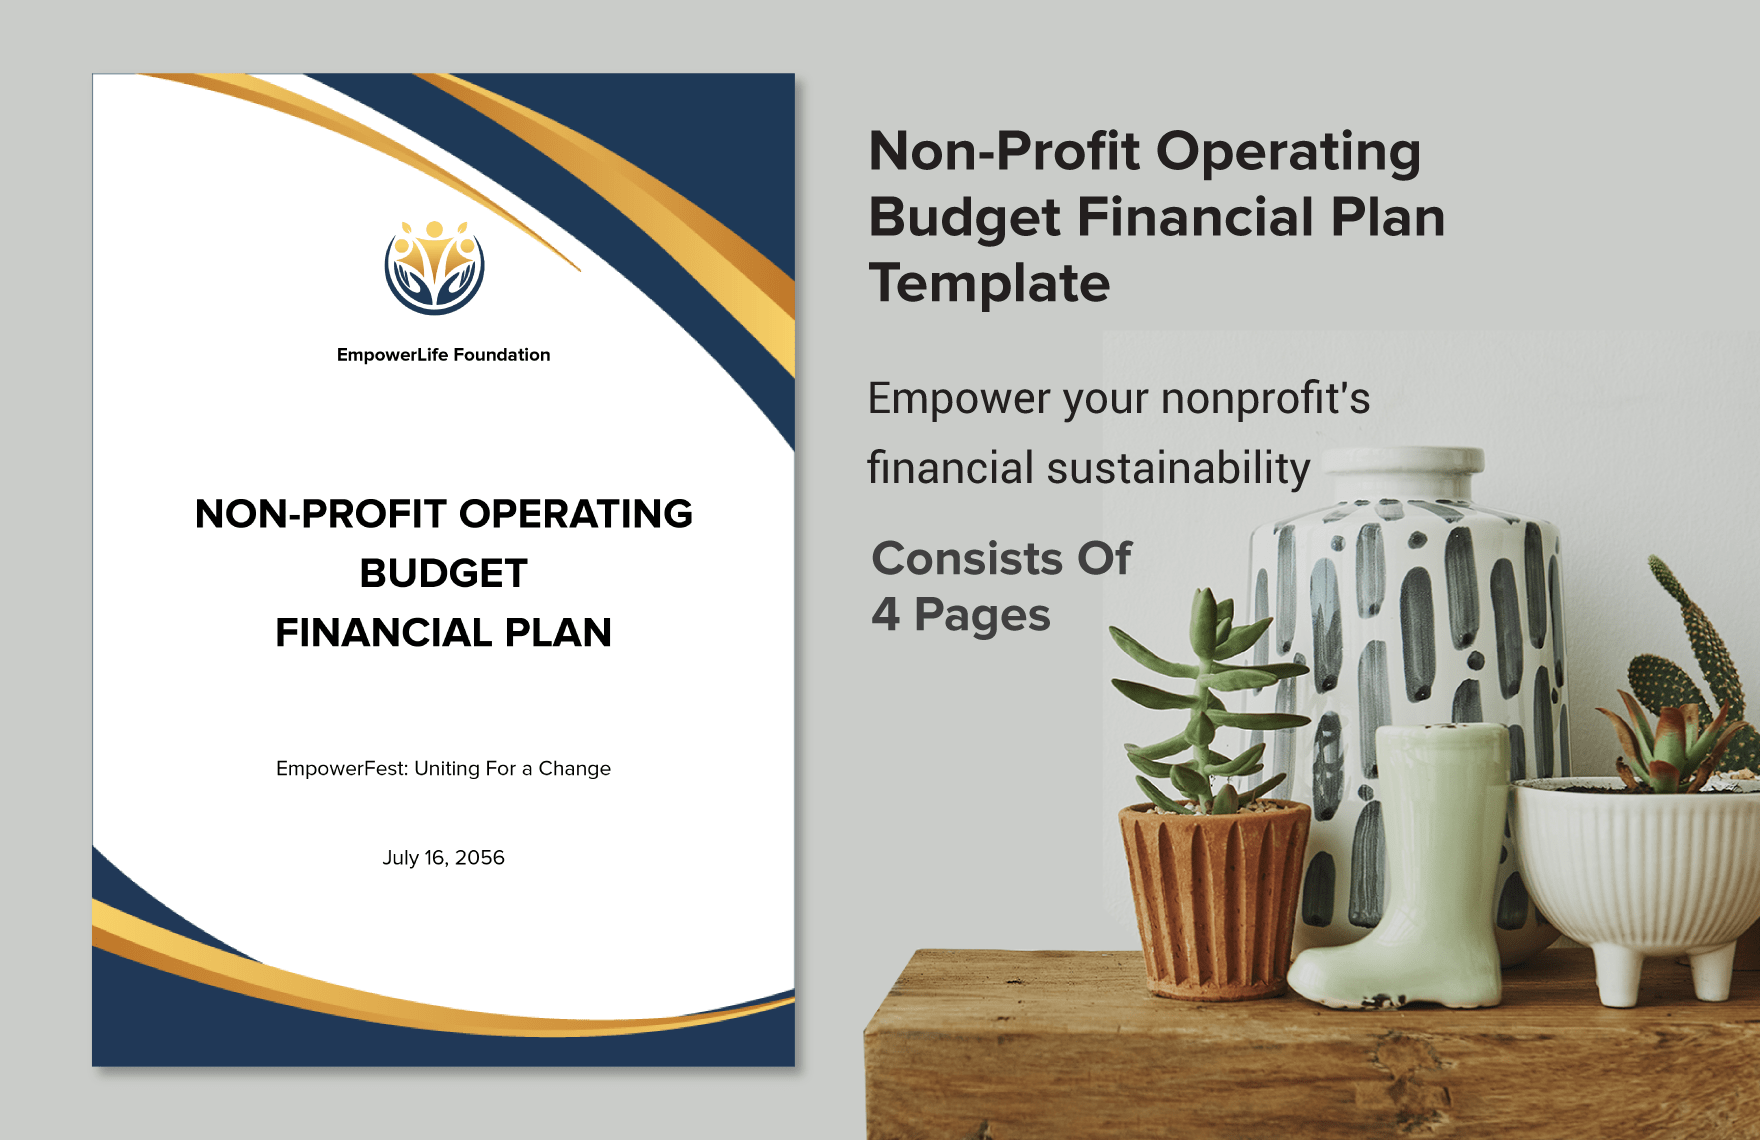 Non-Profit Operating Budget Financial Plan Template